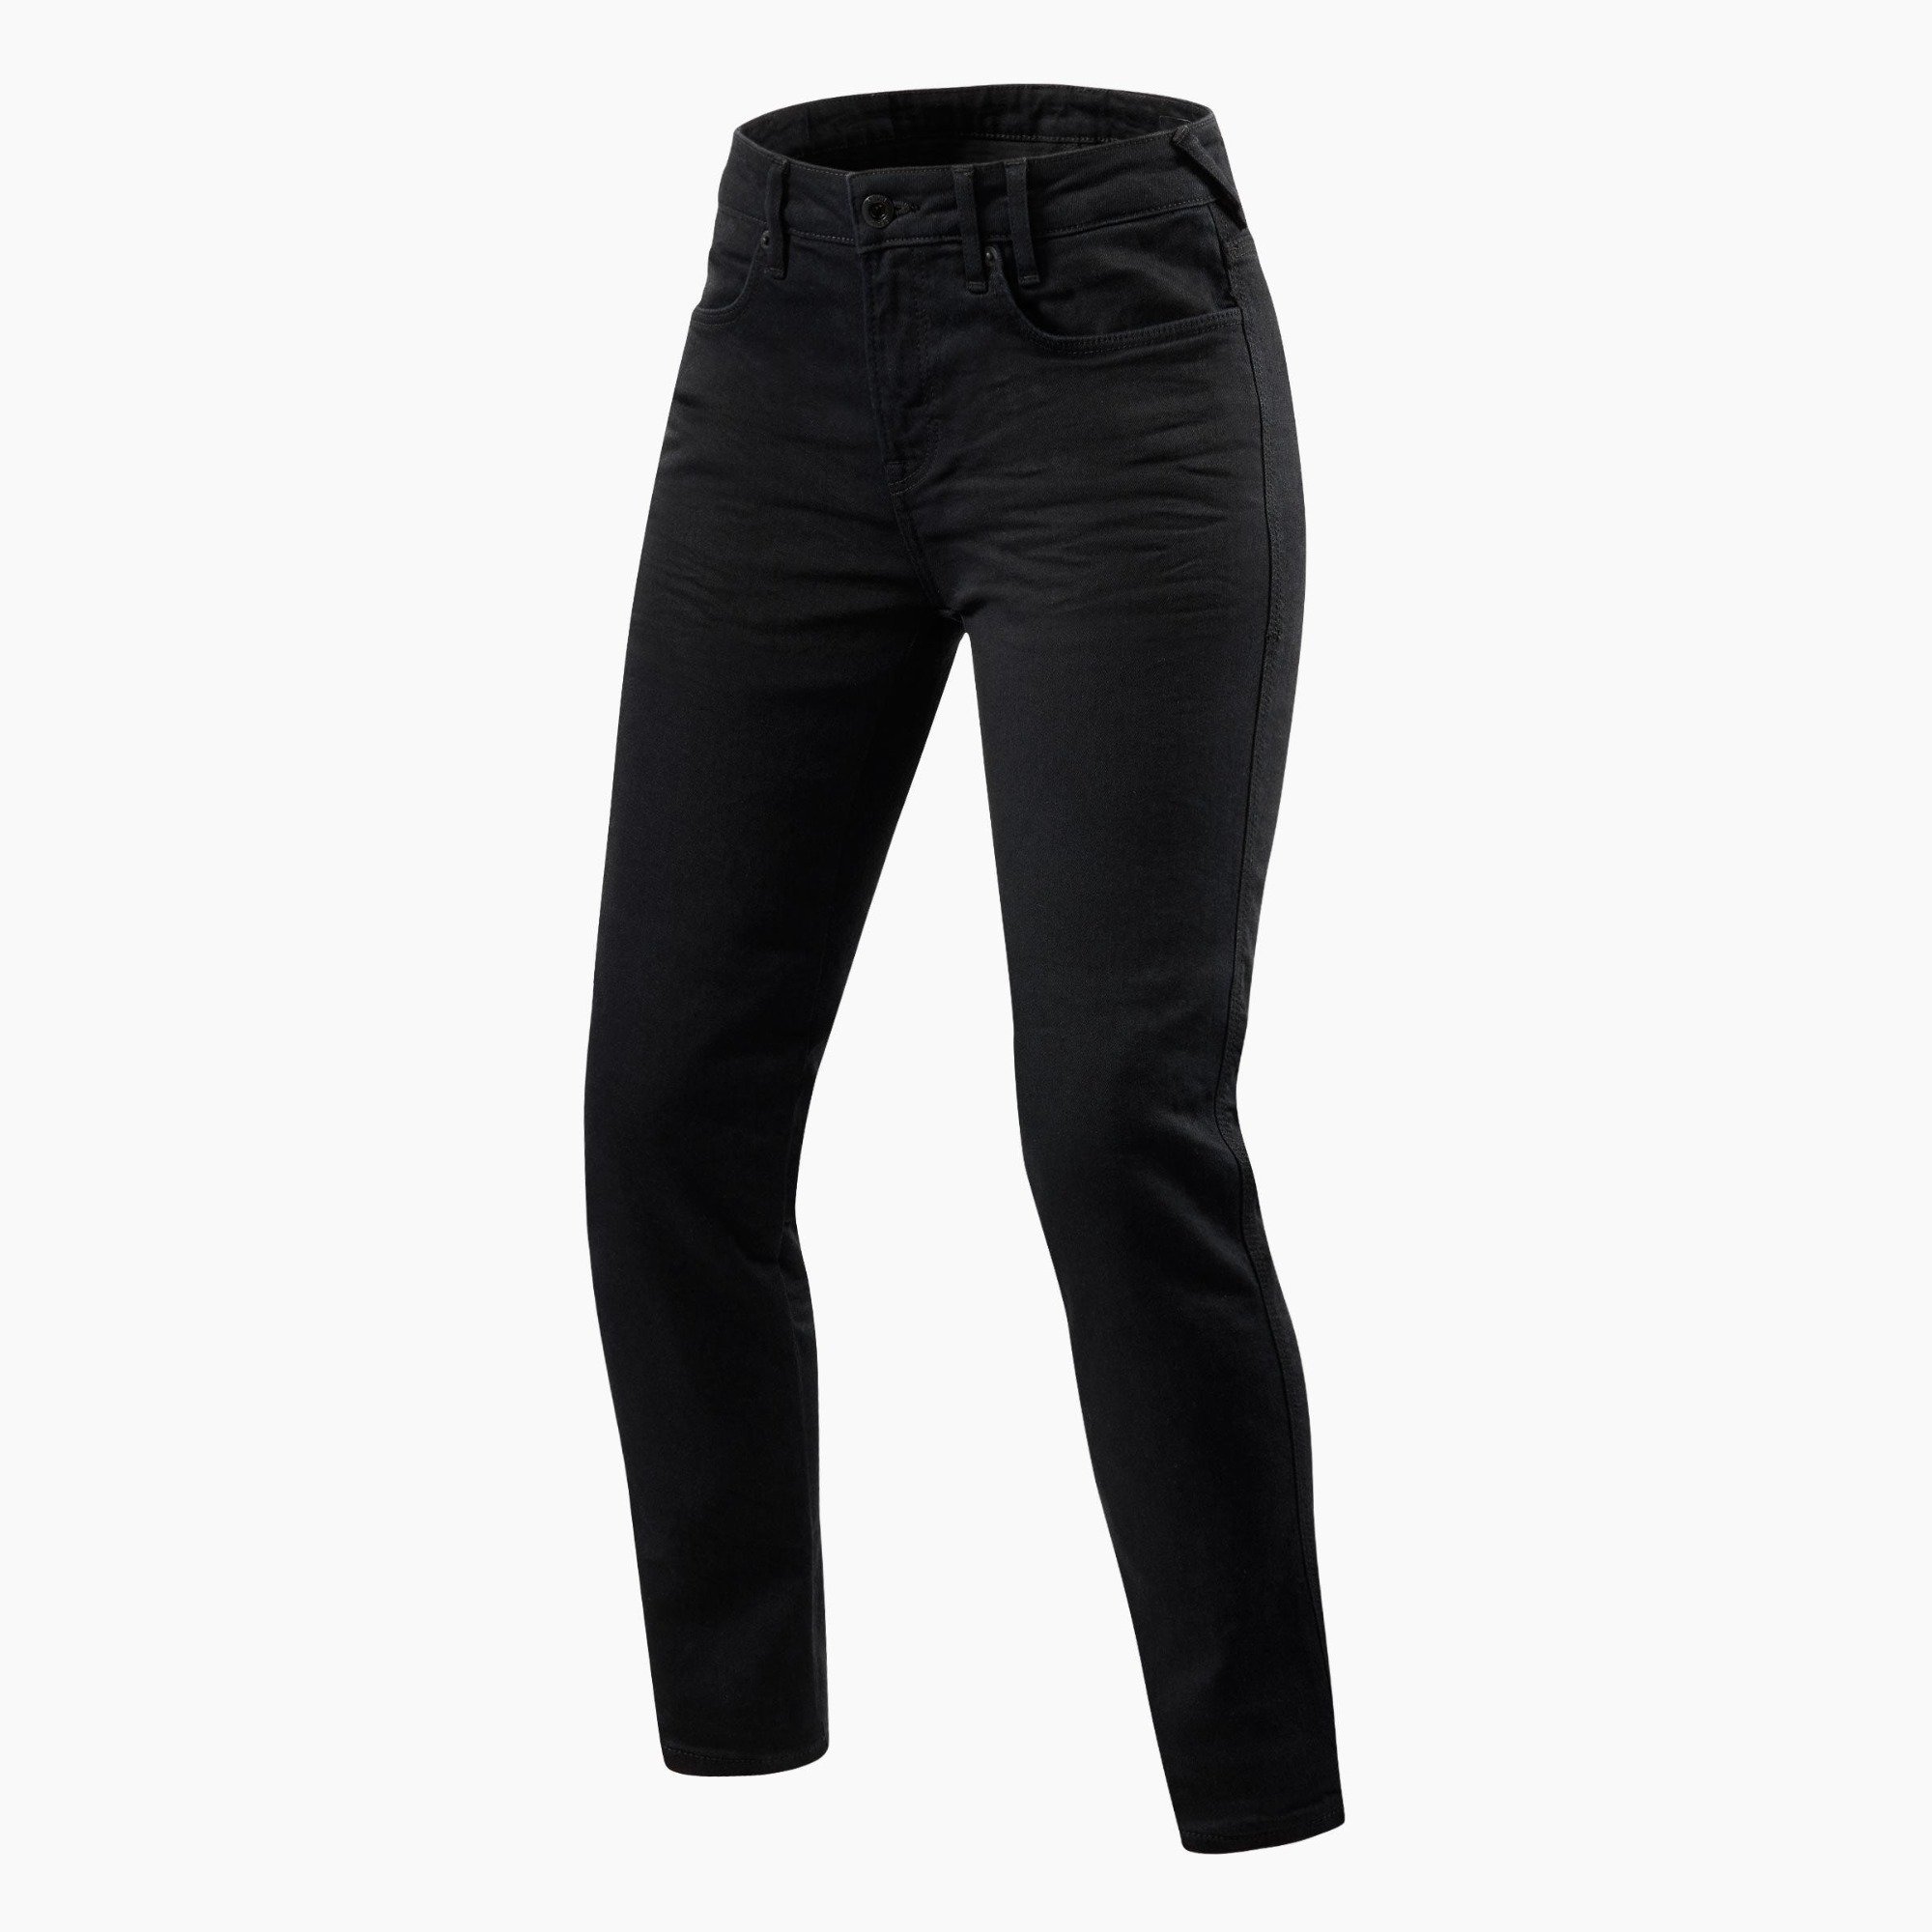 Image of REV'IT! Jeans Maple 2 Ladies SK Black Motorcycle Jeans Size L30/W28 ID 8700001342322